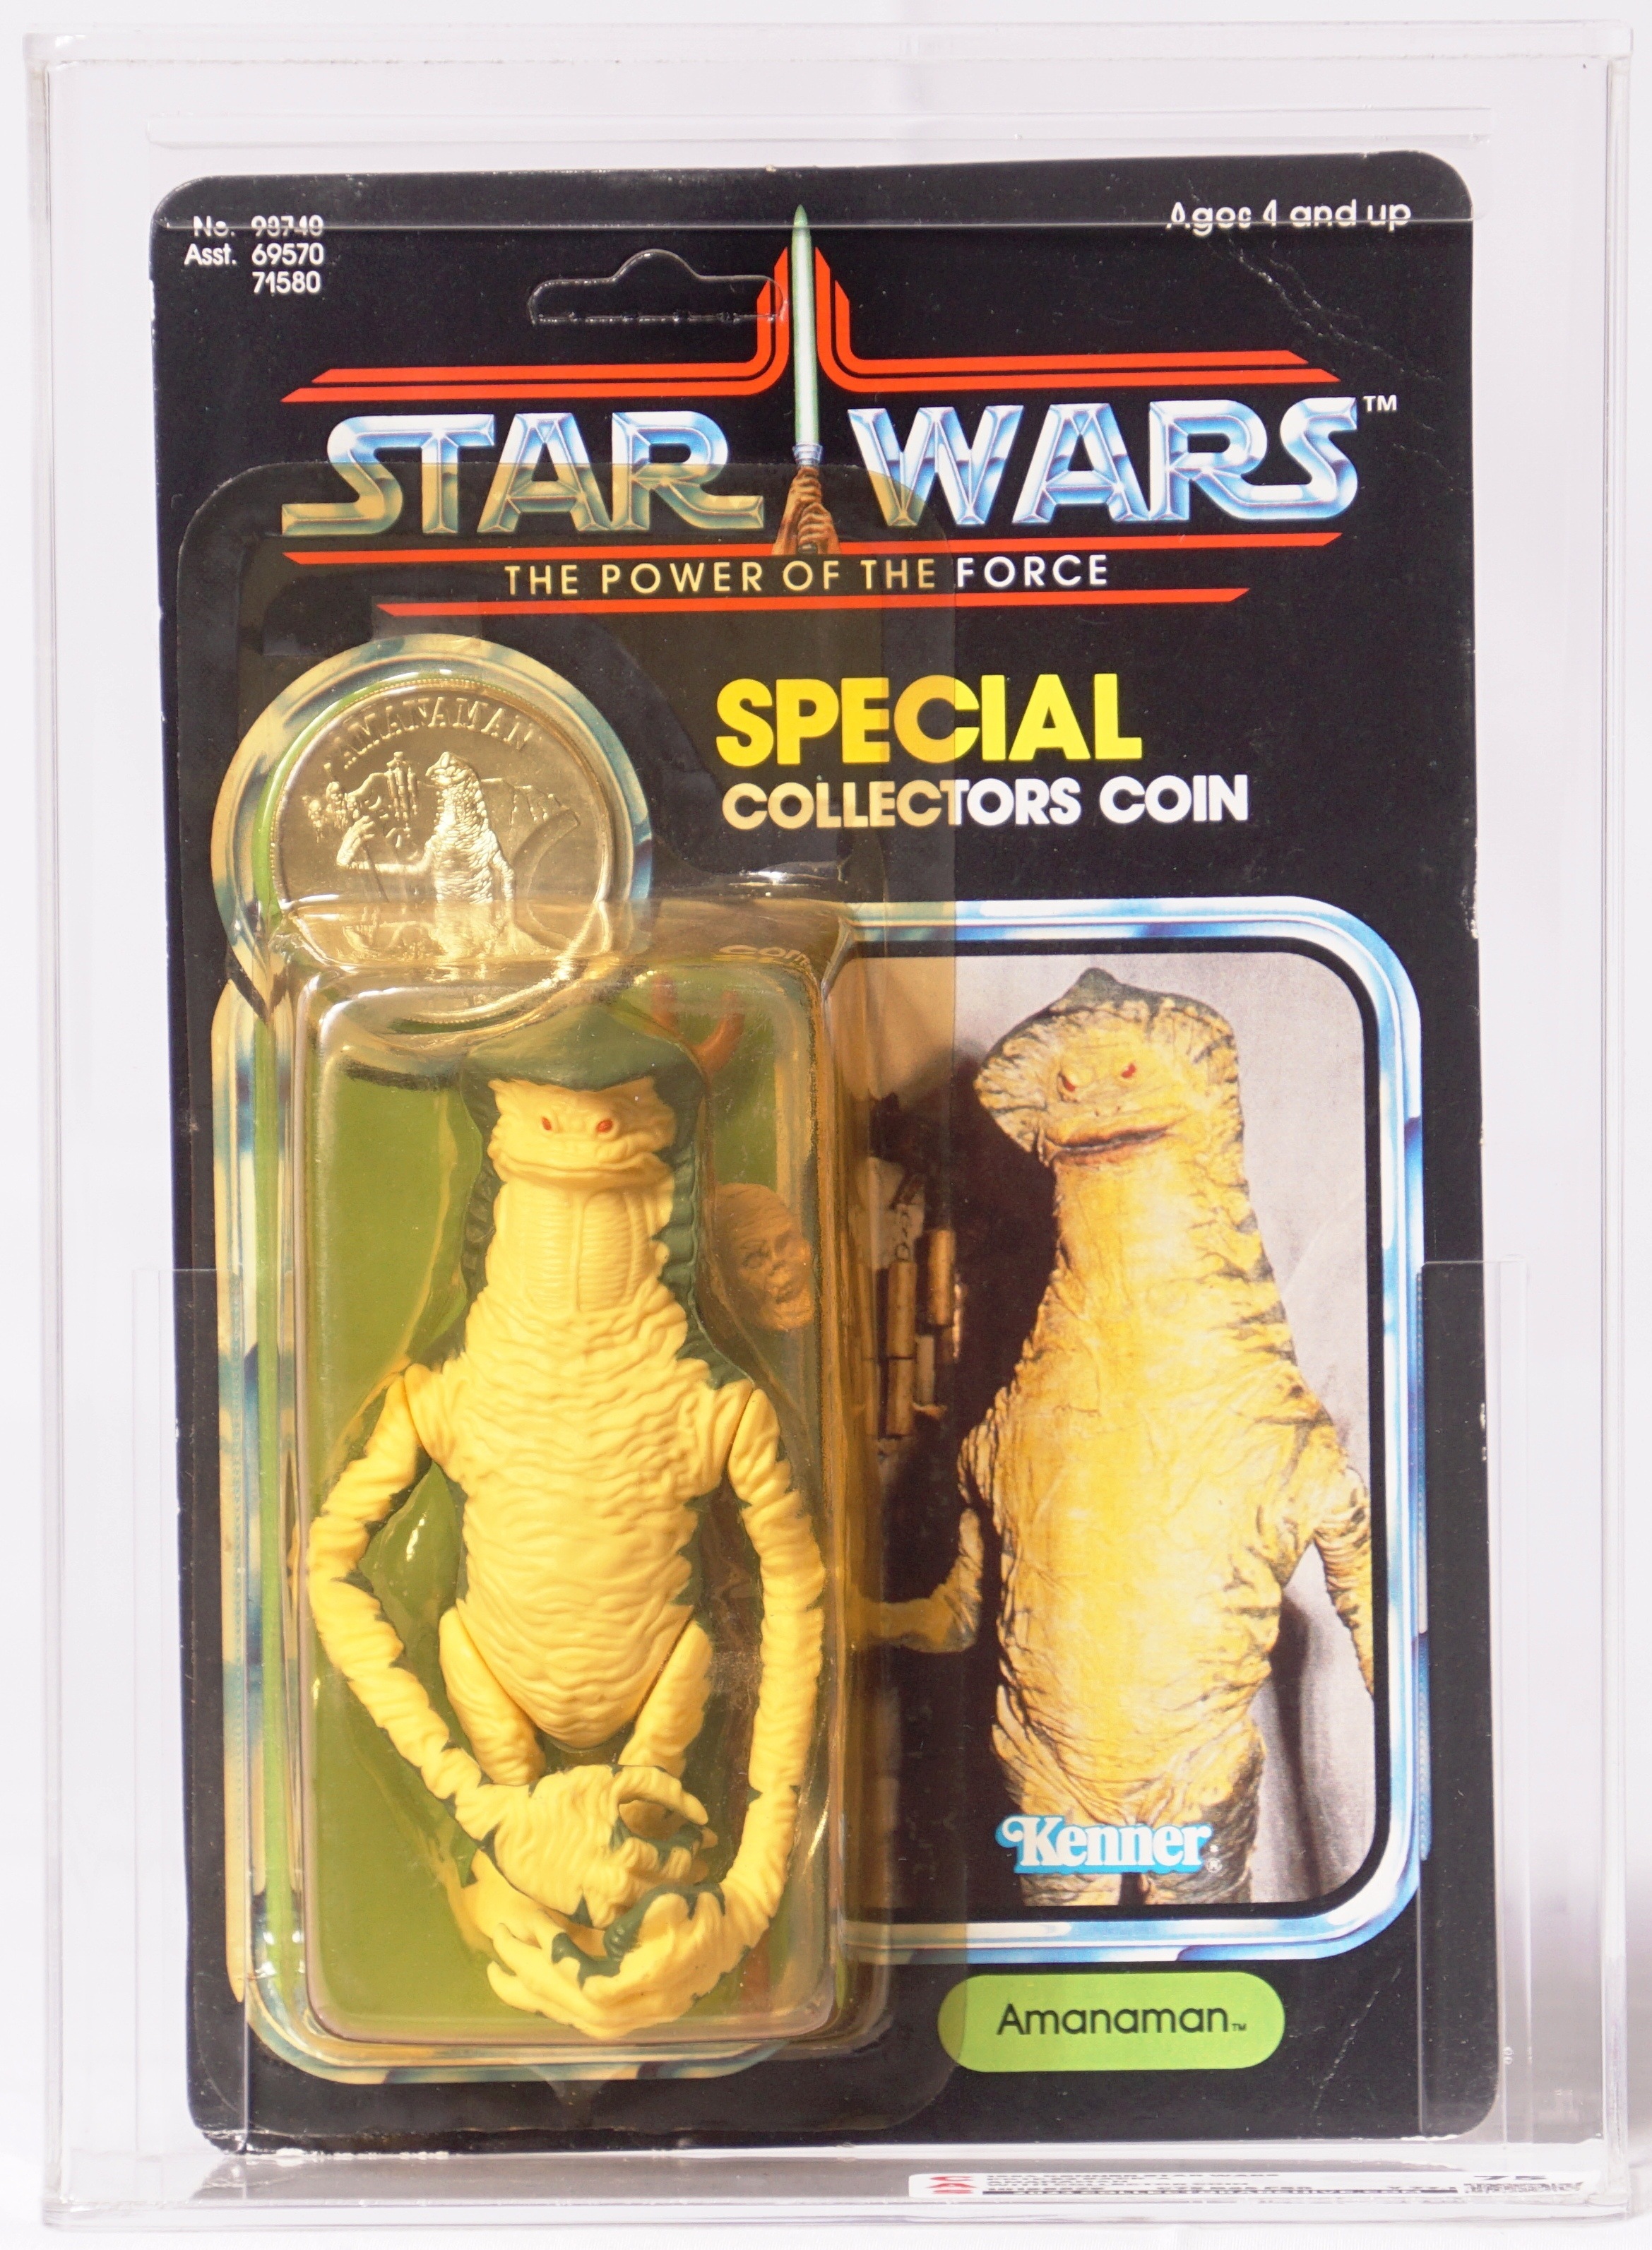 Star Wars Carded Action Figure - Amanaman